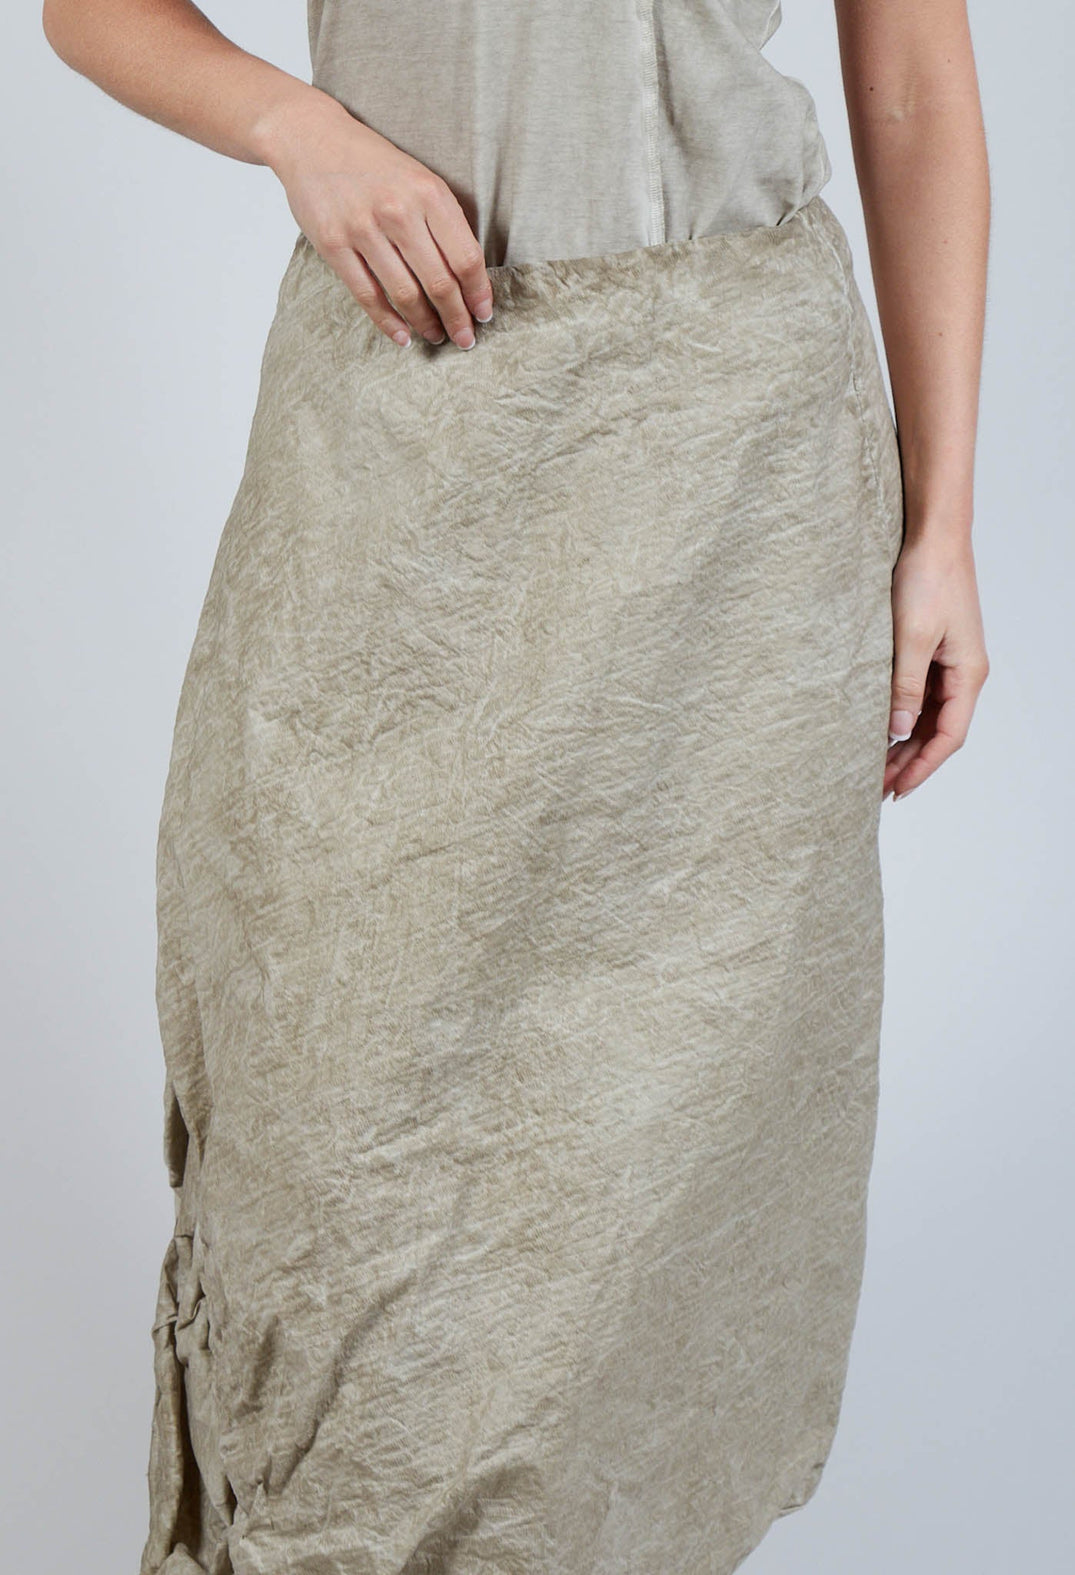 Tucked Fabric Skirt in Straw Cloud